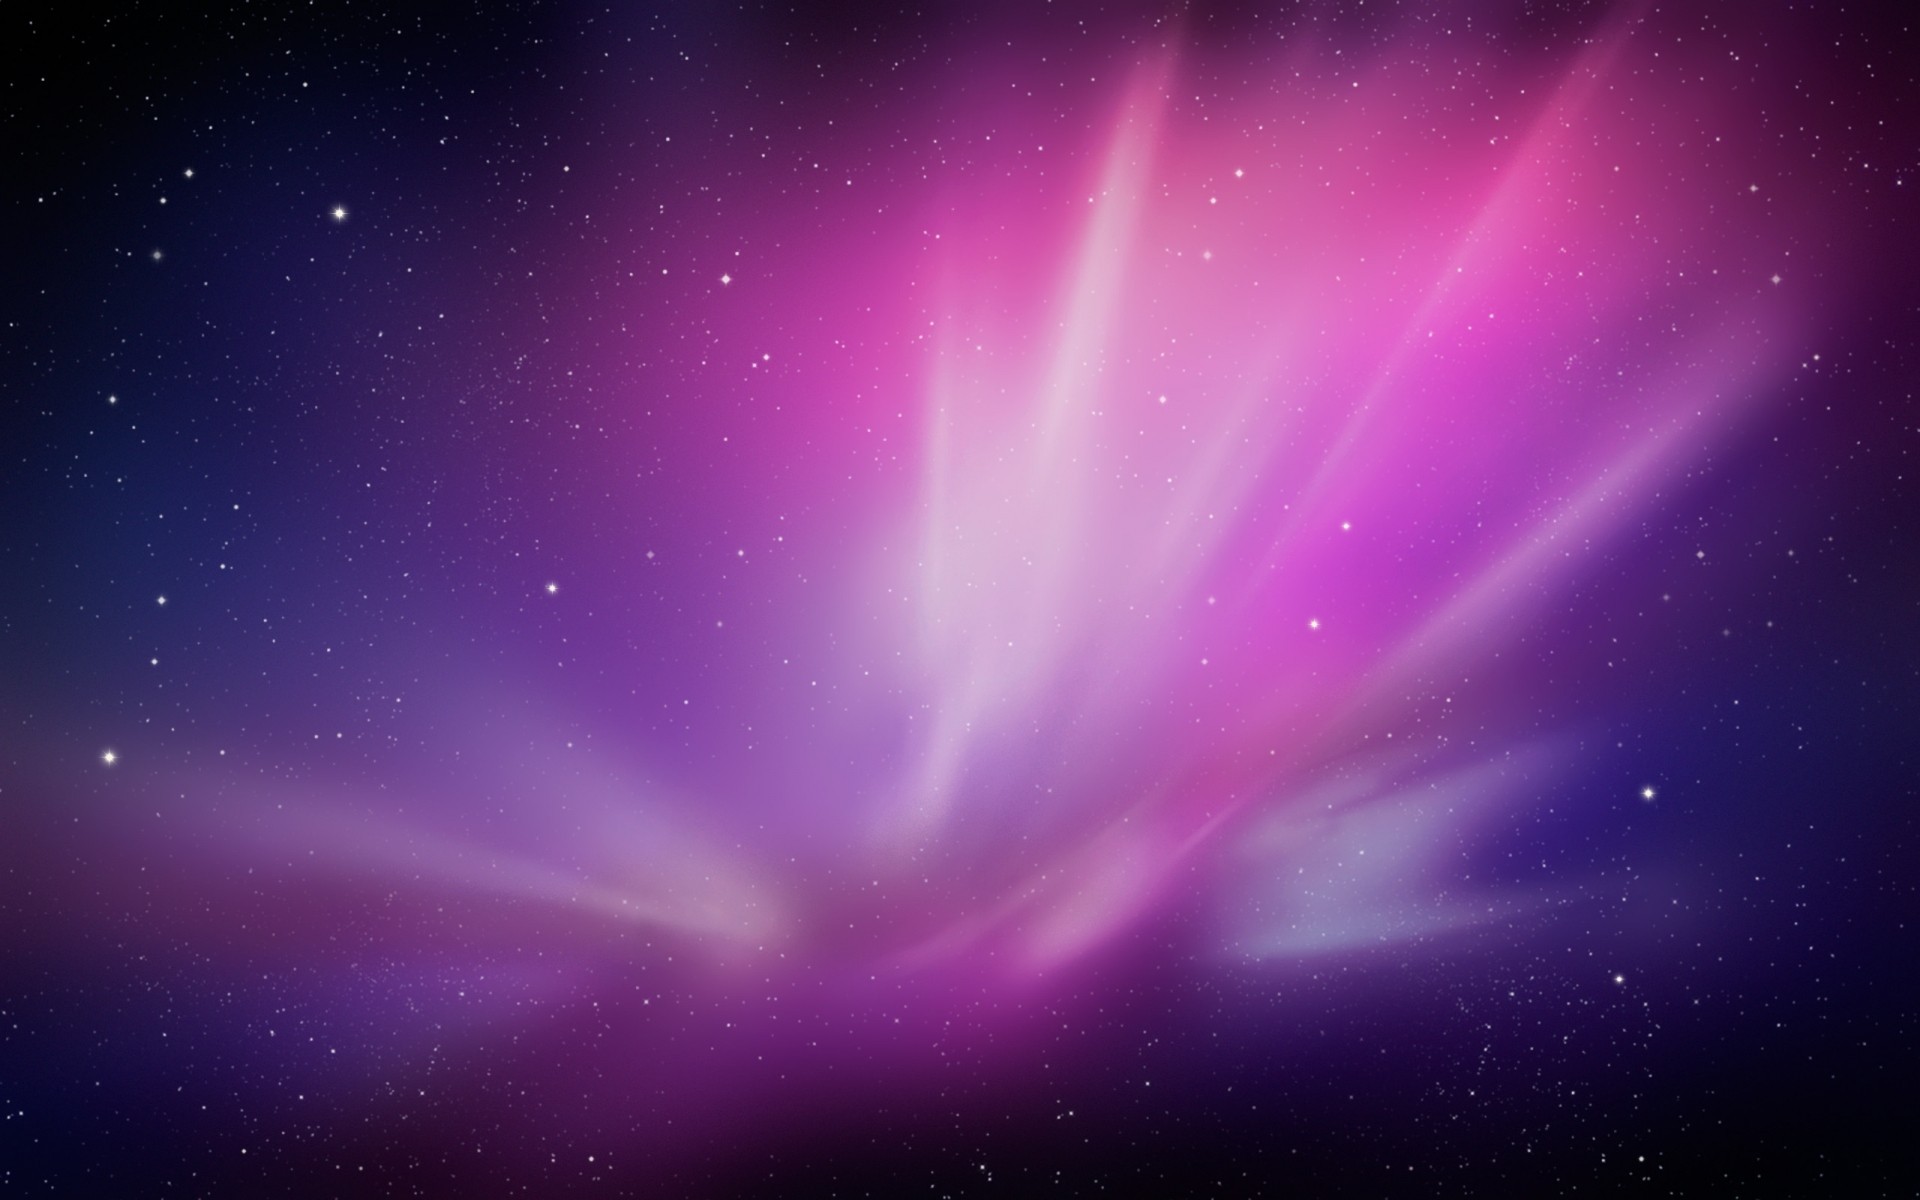 Apple's high-res wallpaper suggests Retina iMac, monitor - CNET